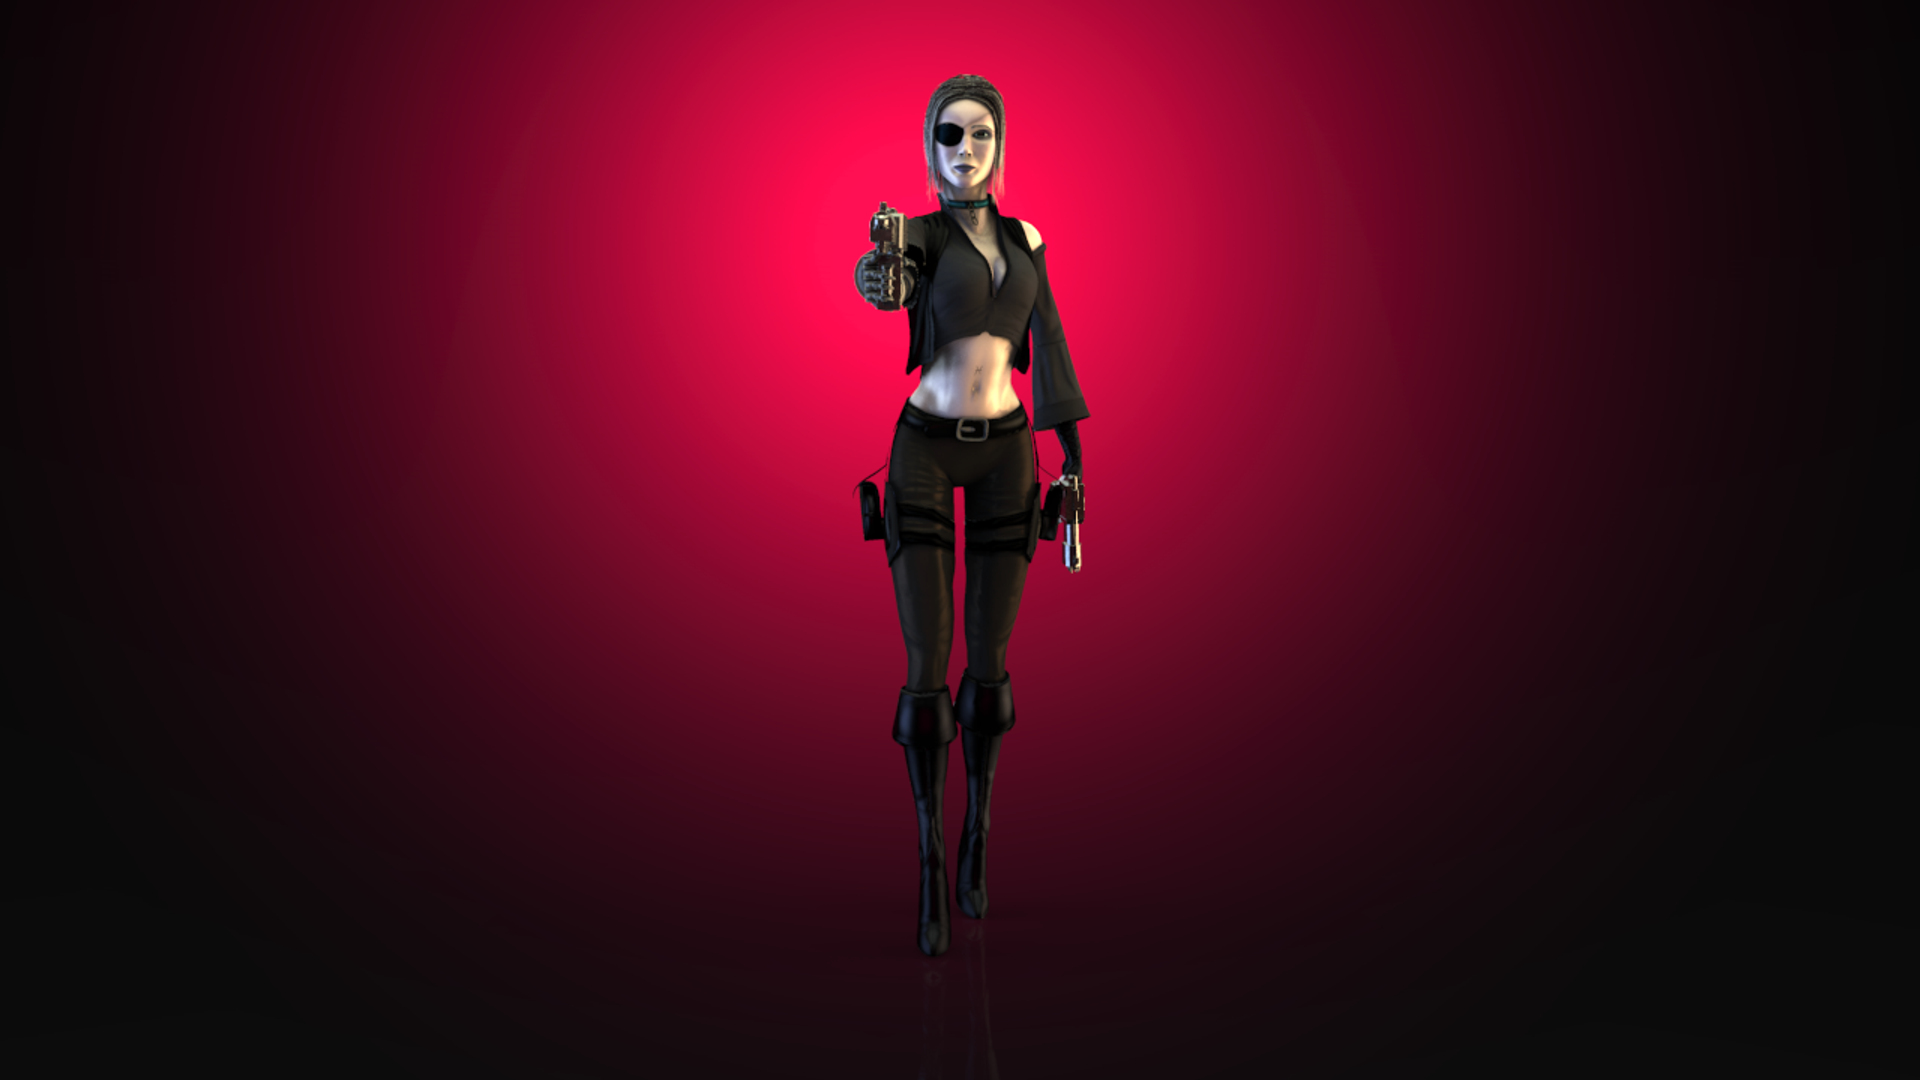 sexy cyber woman warrior character 3ds https://p.turbosquid.com/ts-thumb/yL/z9Fgxv/0VzIpvdn/void/png/1451566067/1920x1080/turn_fit_q99/4939da53720e922d37f34669e7e0d9835c533a61/void-1.jpg